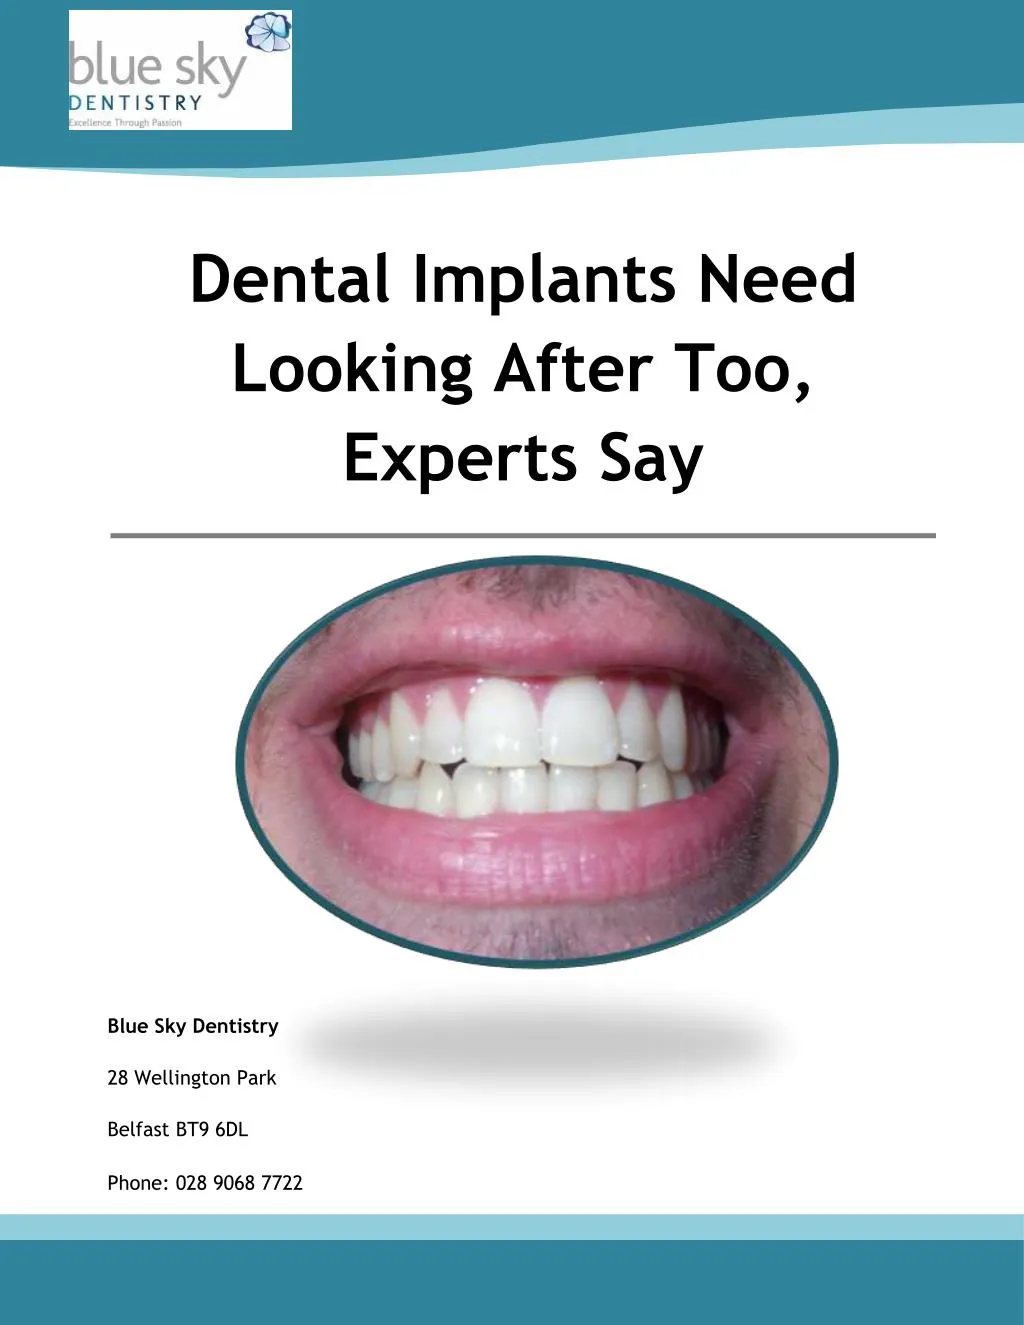 Ppt Dental Implants Need Looking After Too Experts Say Powerpoint Presentation Id